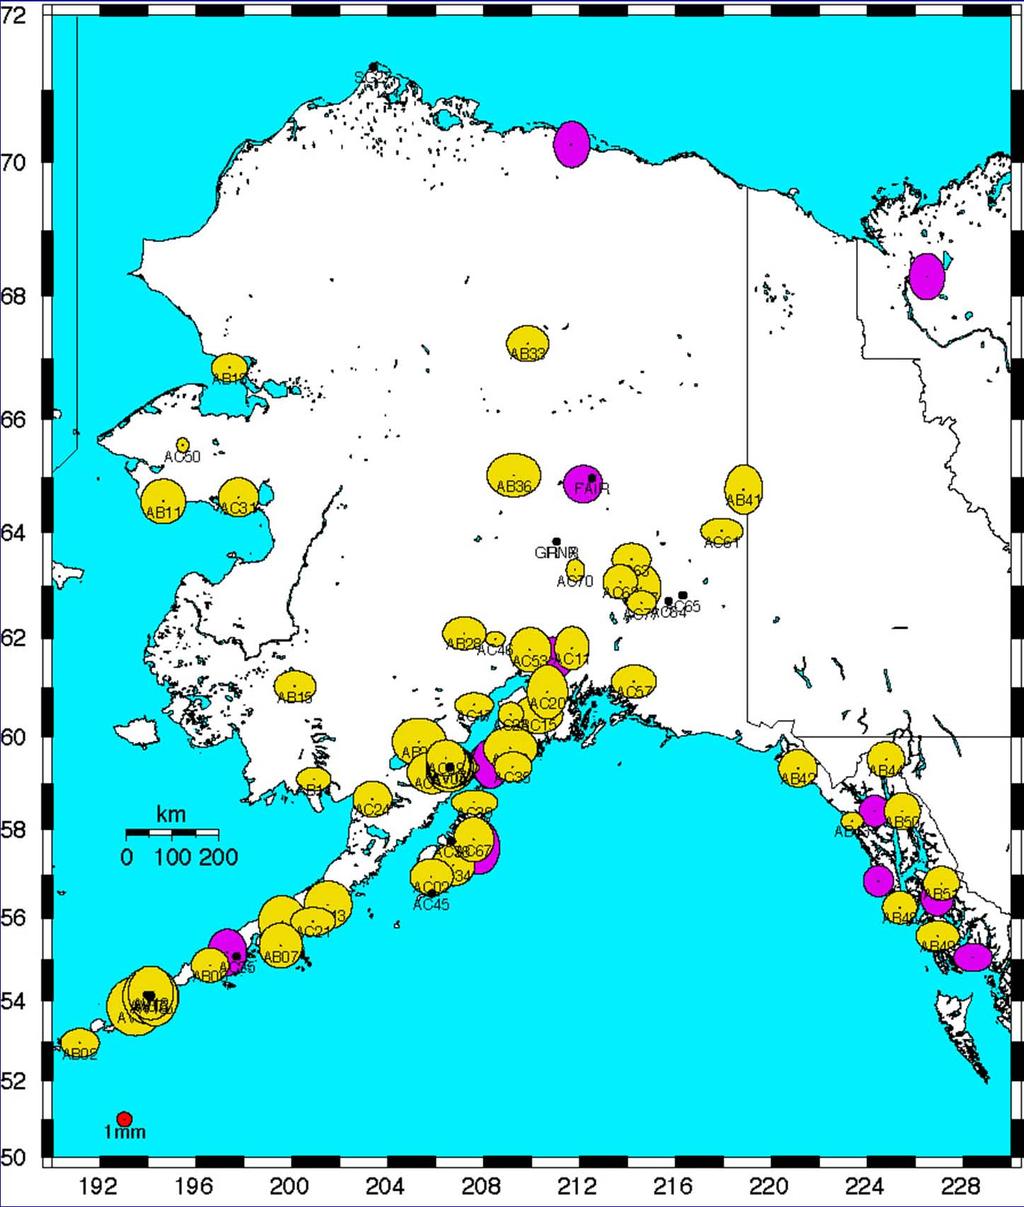 Alaskan Sites RMS scatter of these sites is higher than CONUS; regional